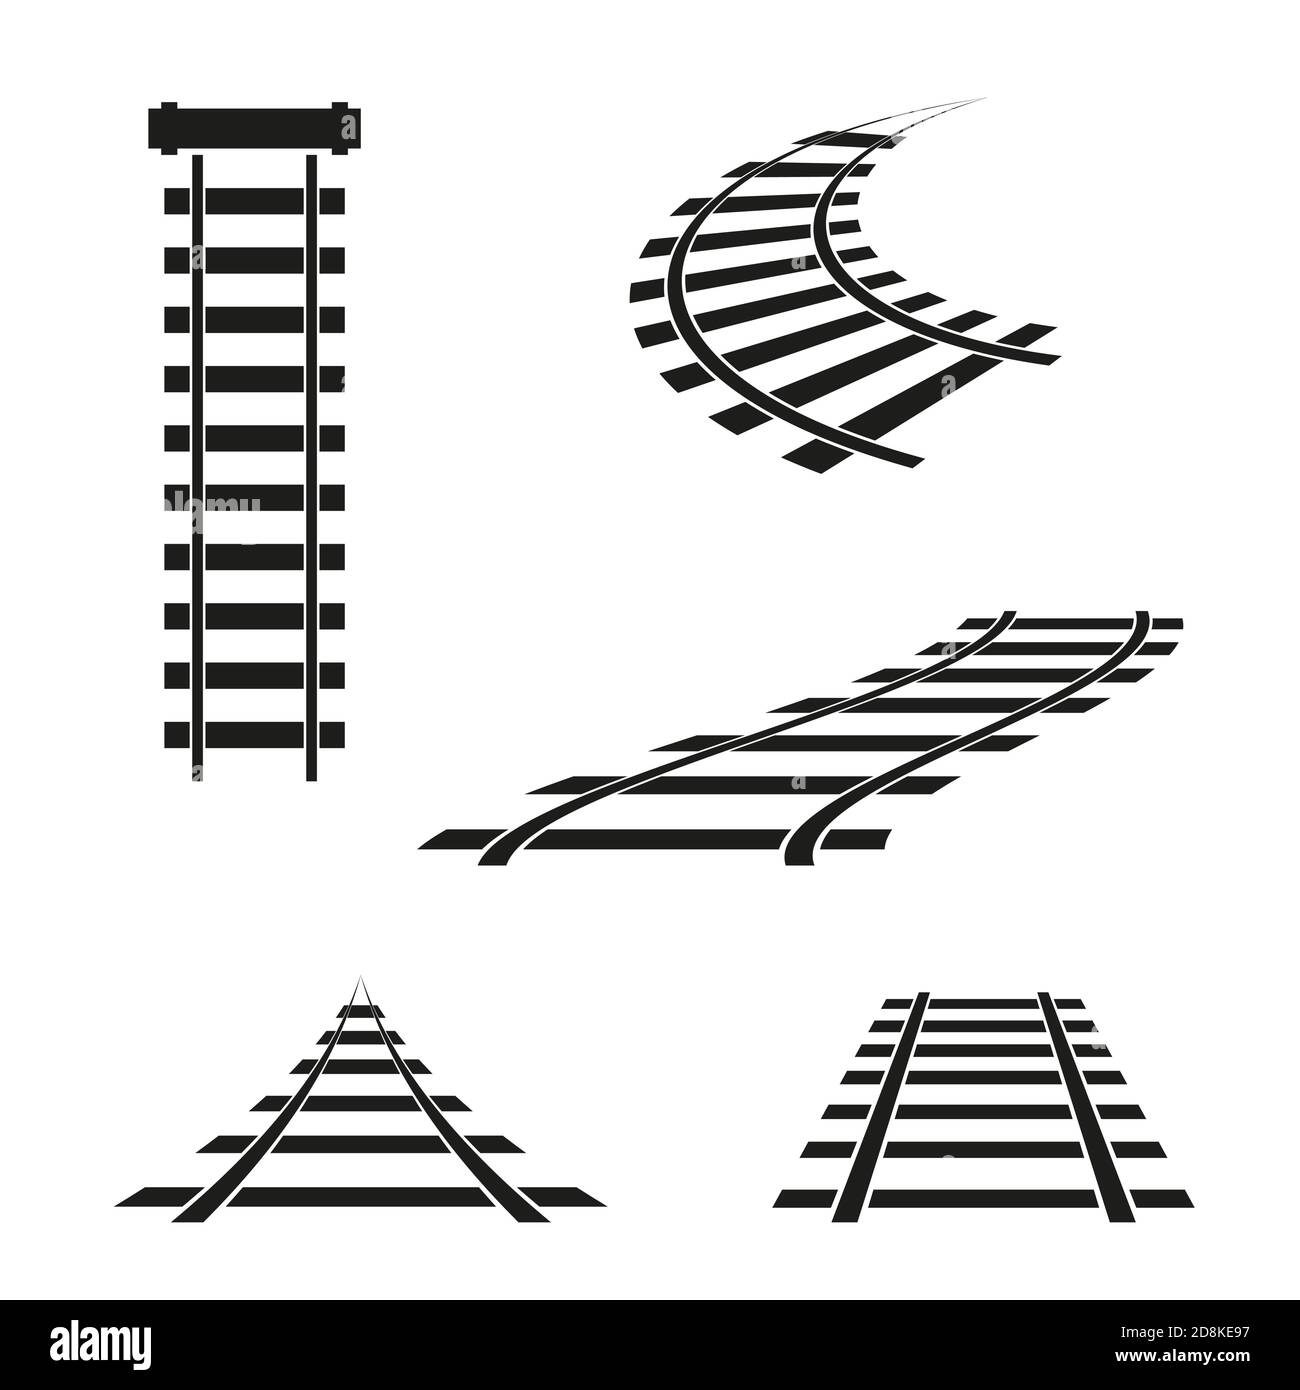 Rail icons in different angles Stock Vector